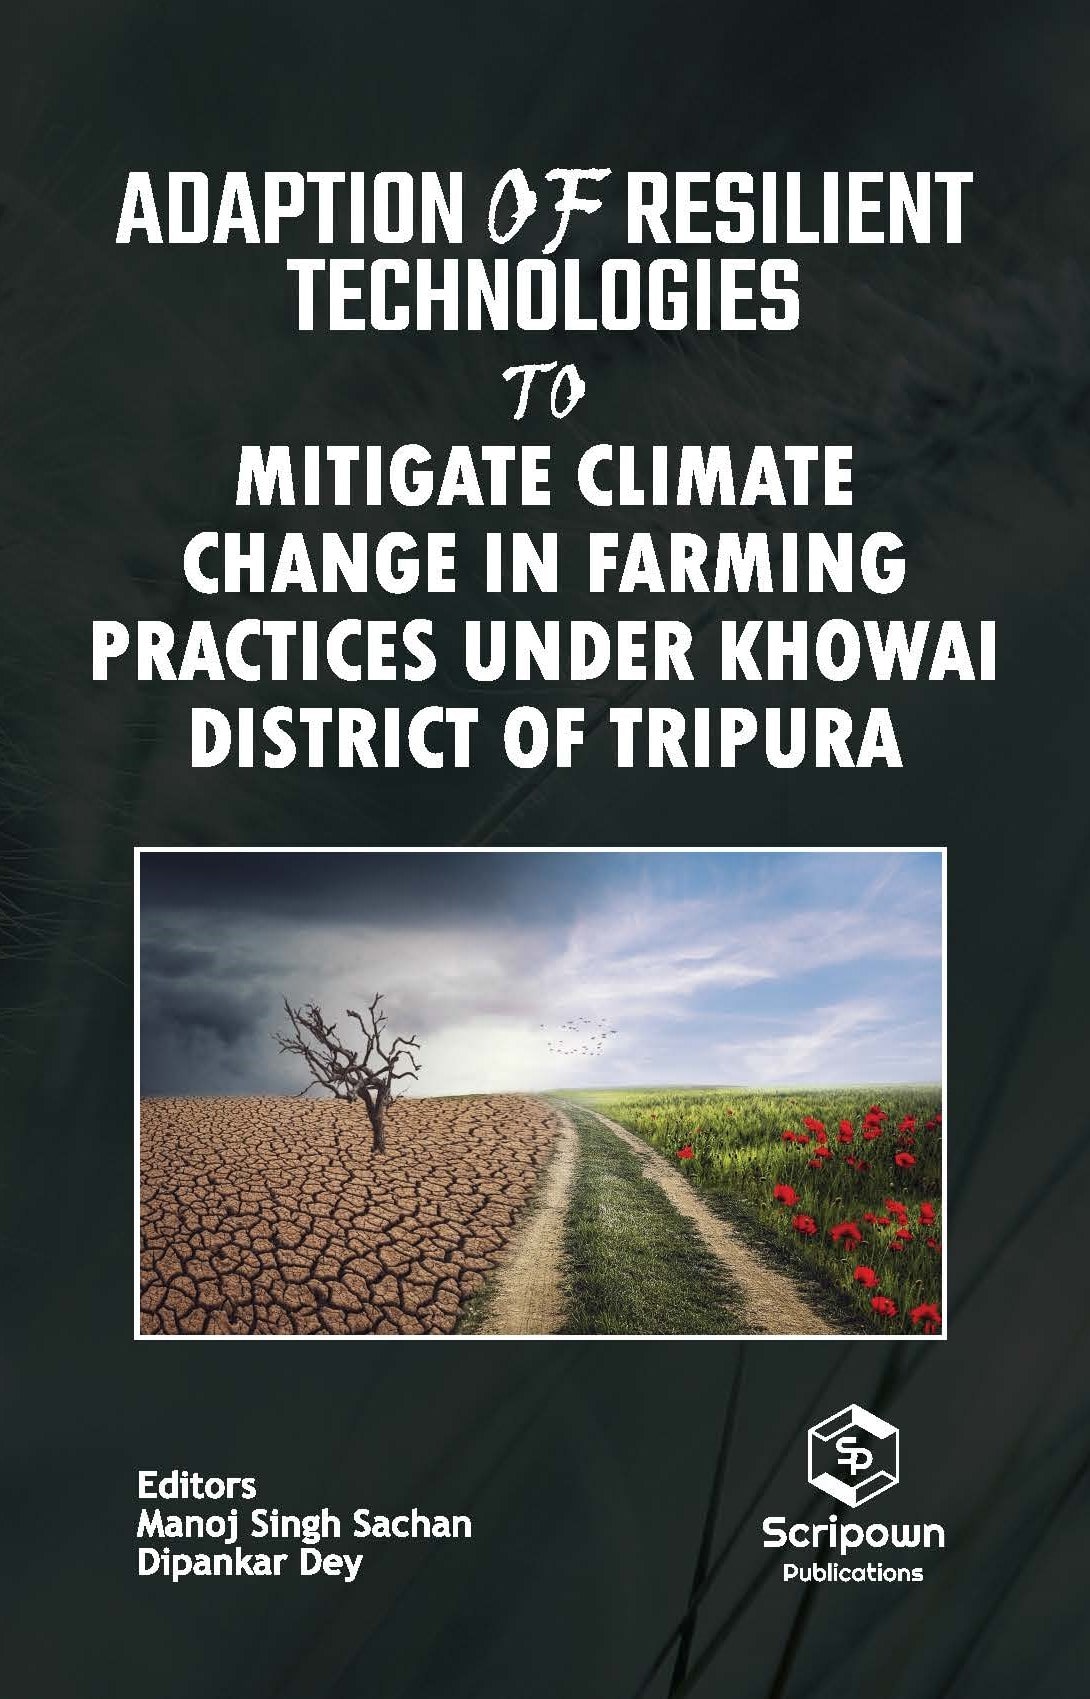 Adoption of Resilient Technologies to Mitigate Climate Change in Farming Practices under Khowai District of Tripura